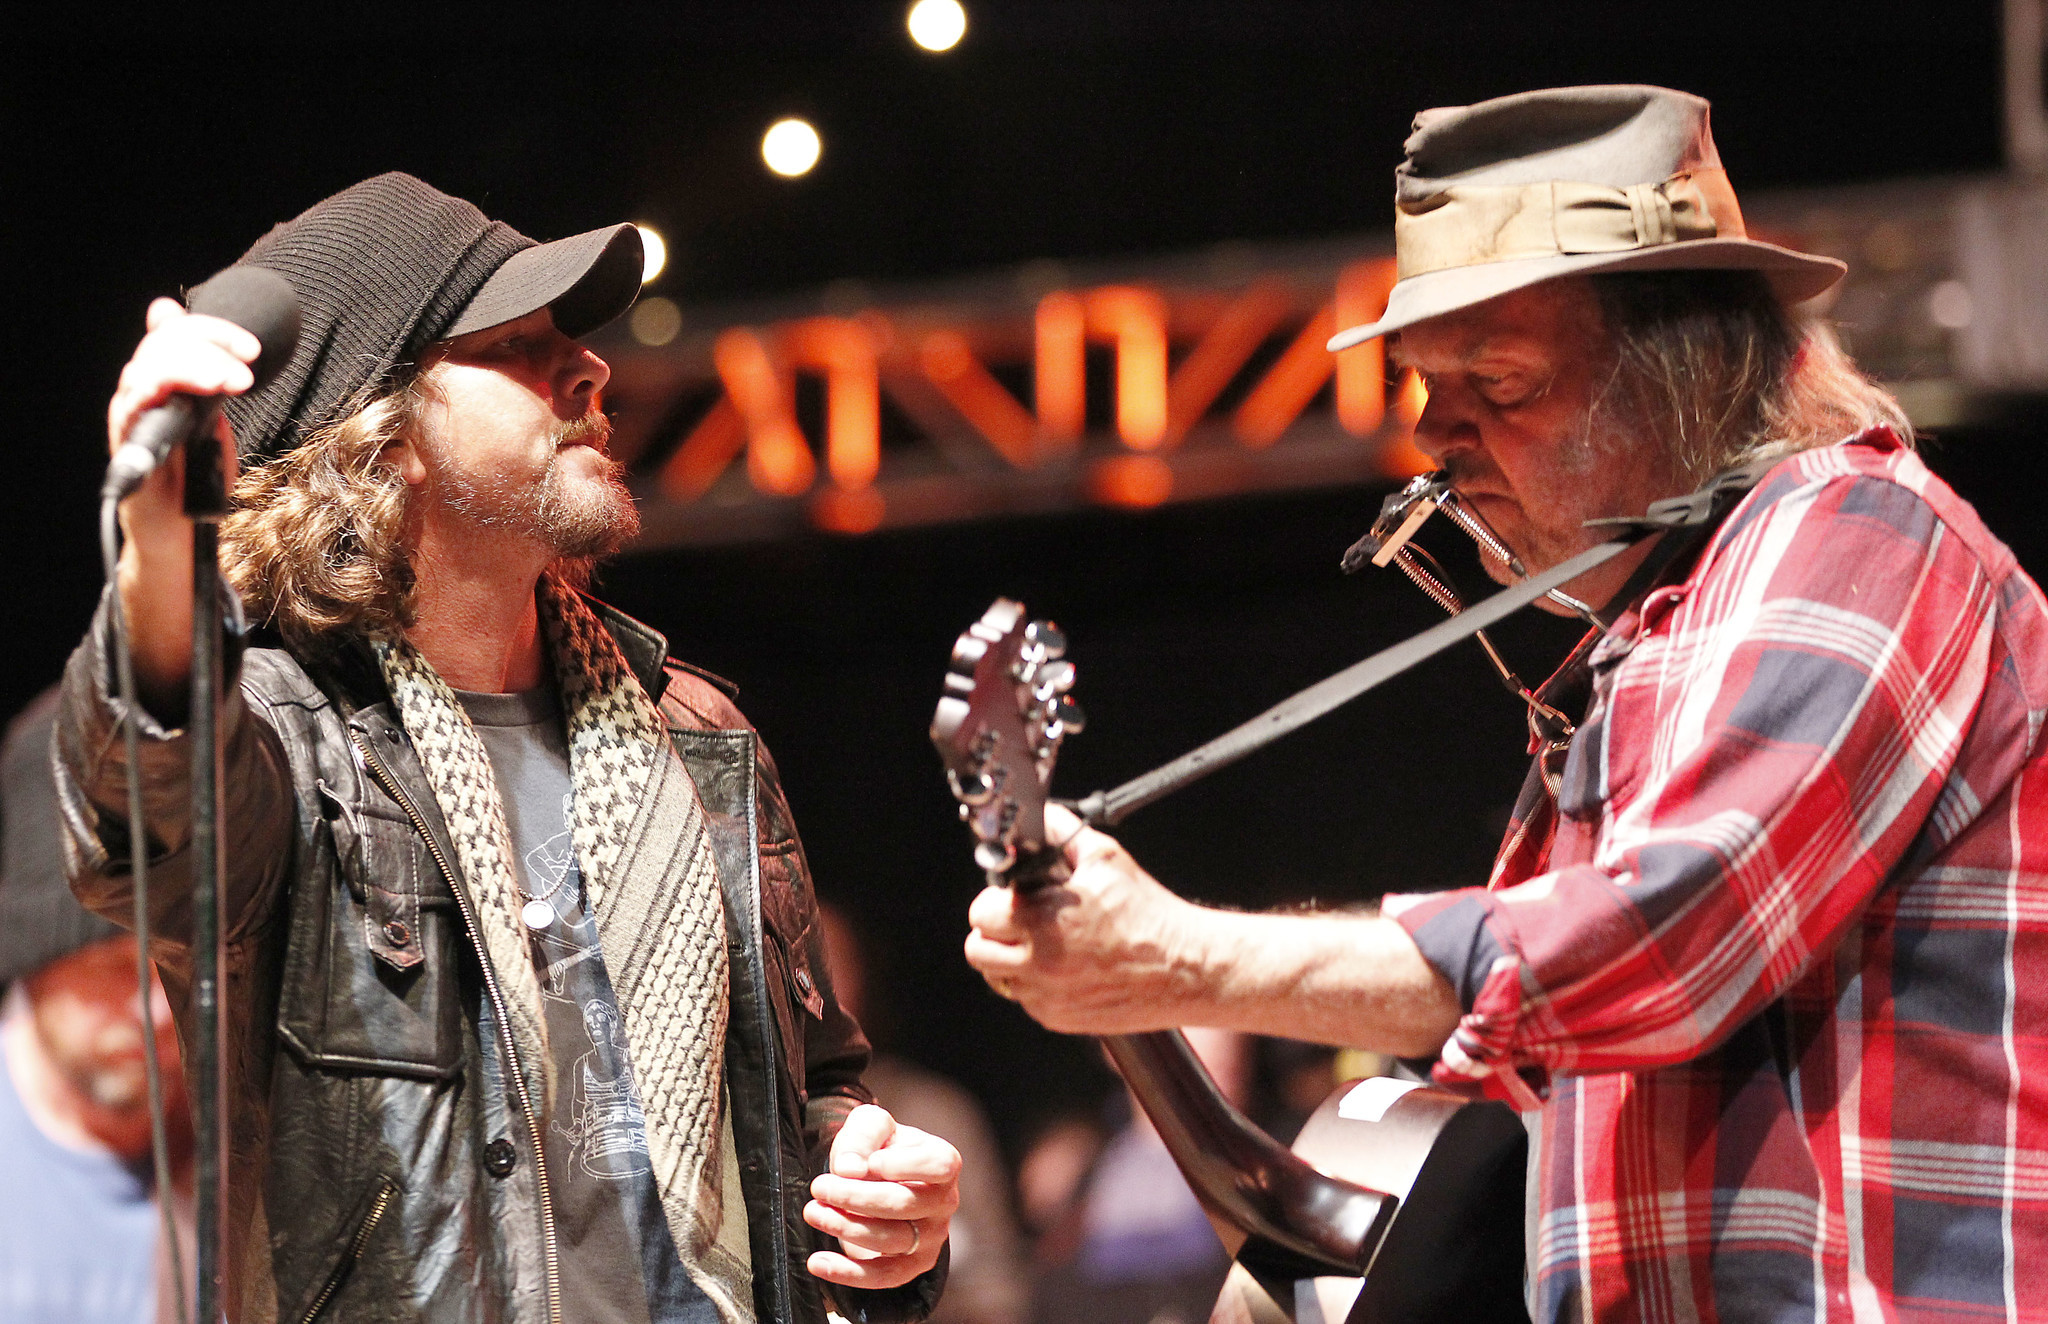 Neil Young to induct Pearl Jam into Rock and Roll Hall of Fame - Chicago Tribune2048 x 1324